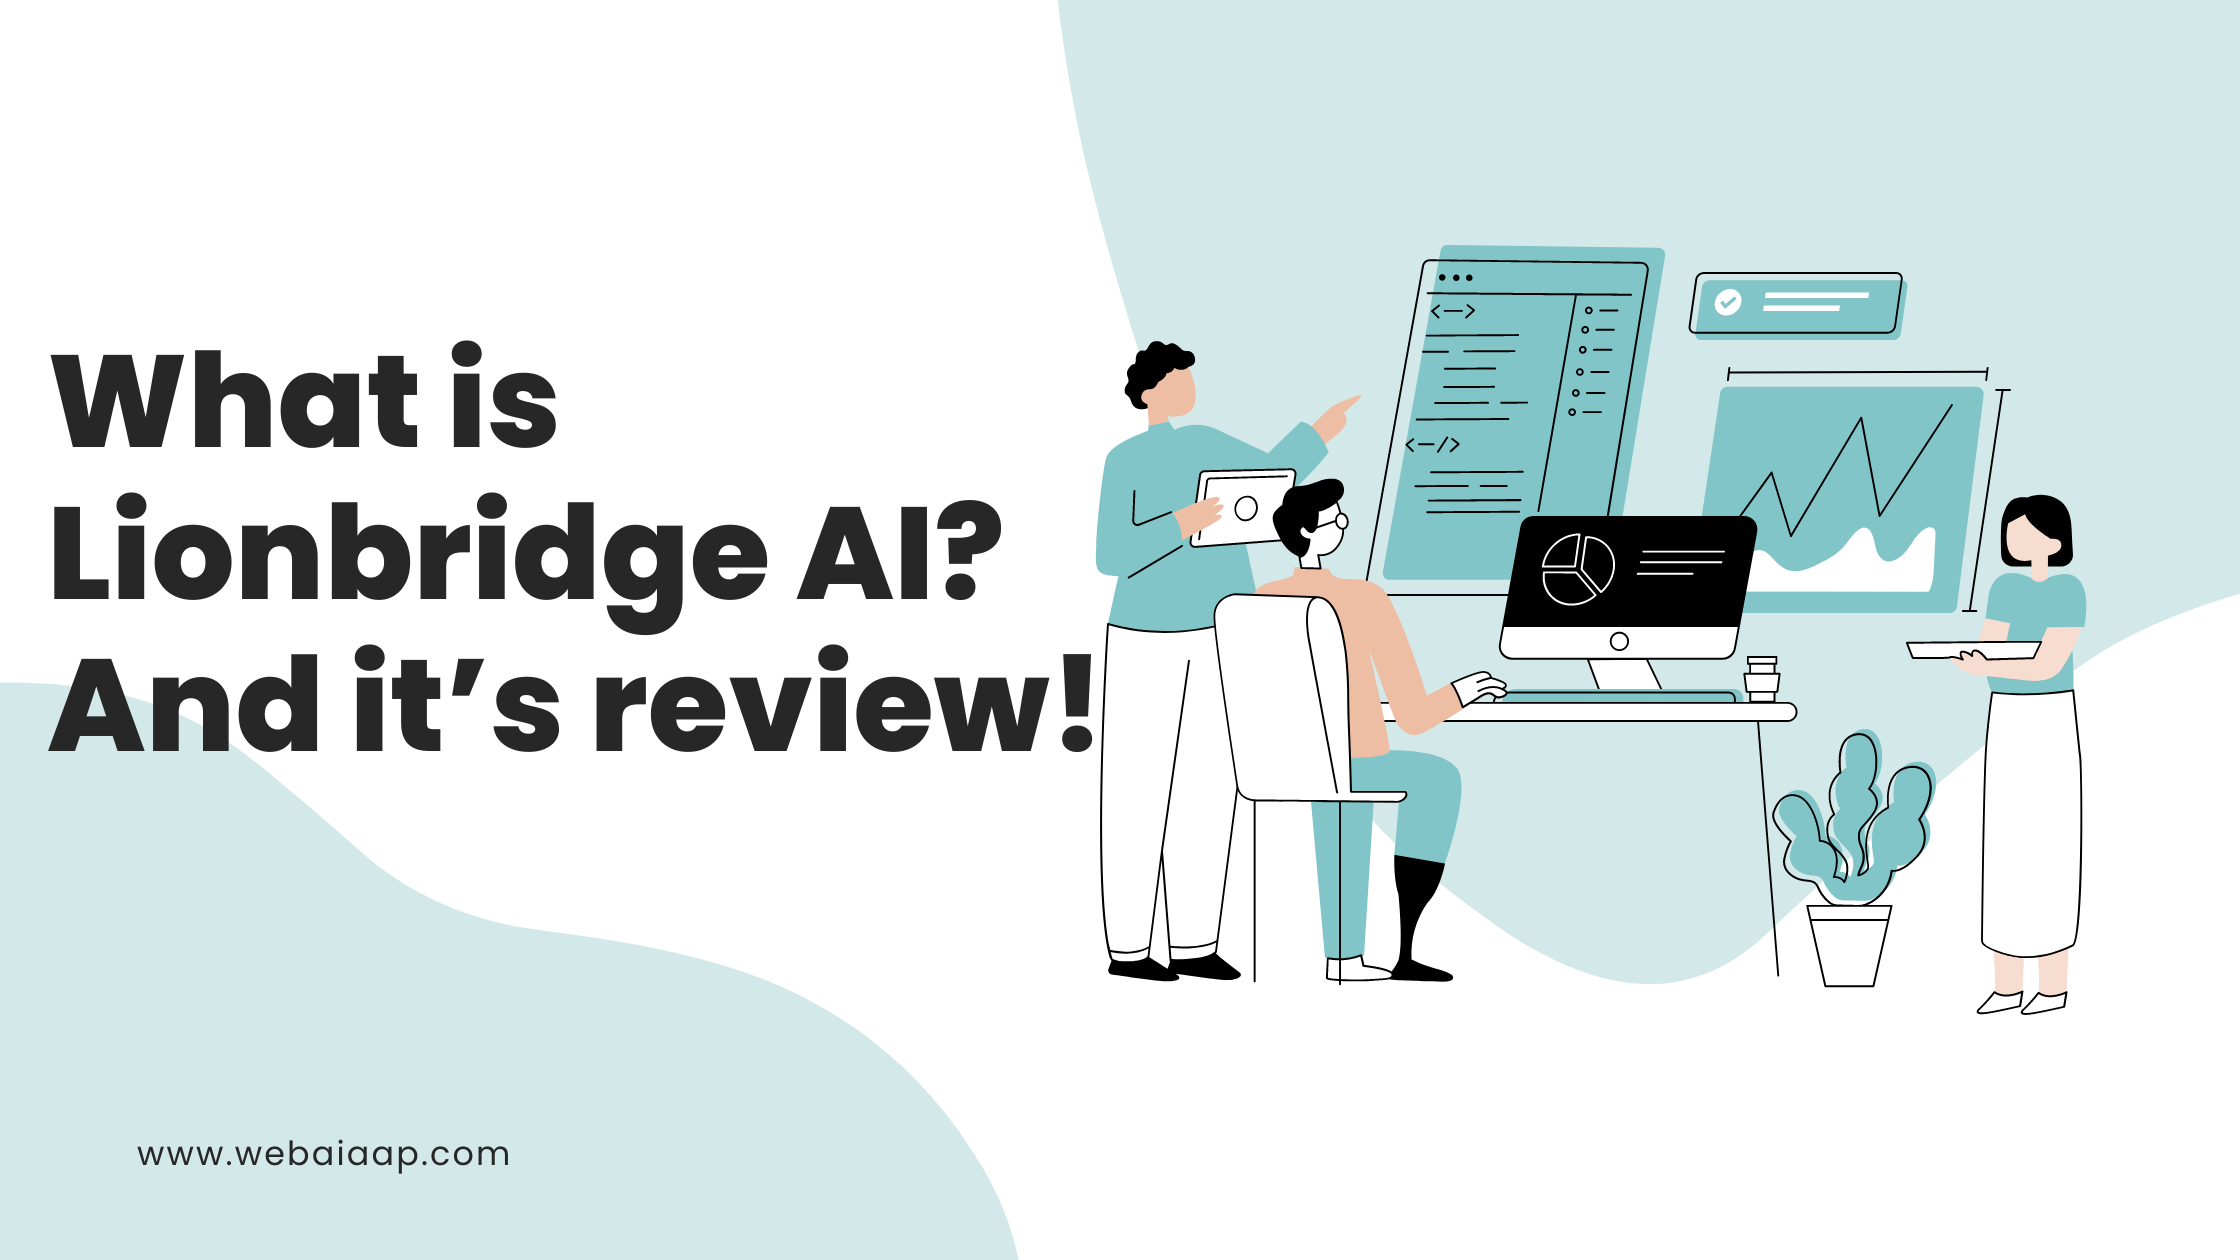 What is Lionbridge AI? And it’s review!